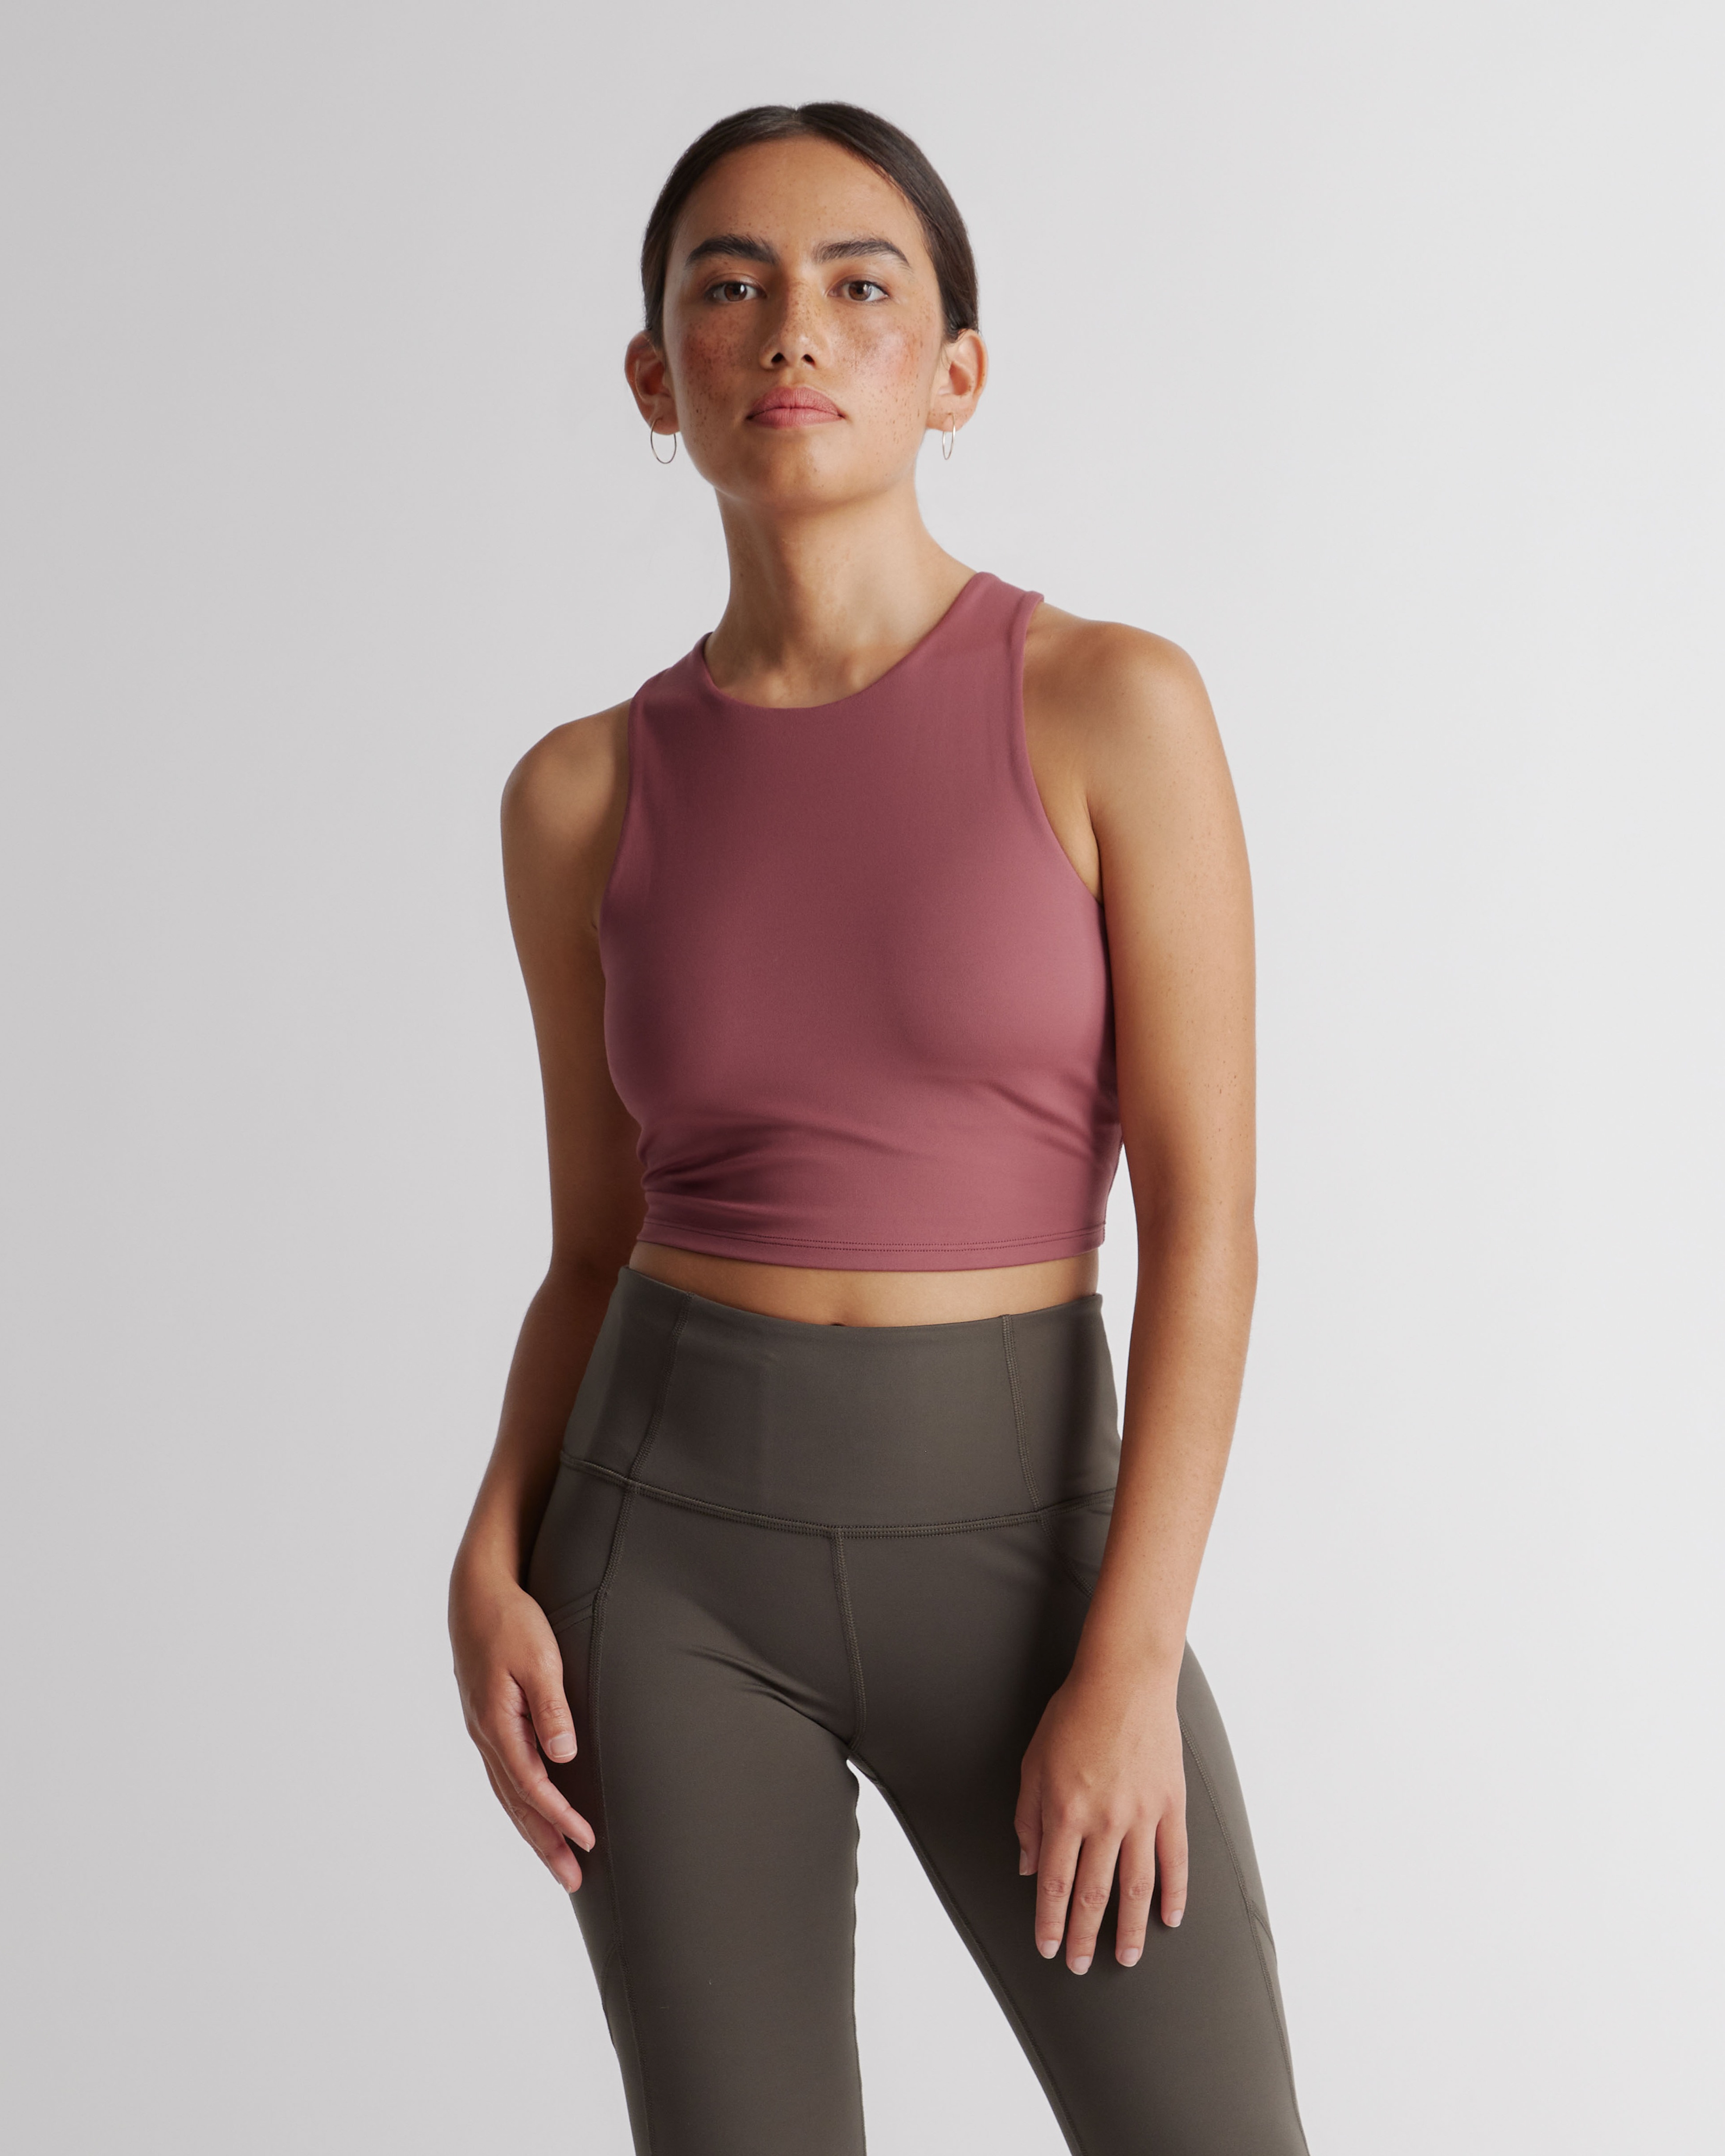 Is it possible to make a woven top with a shelf bra built in? : r